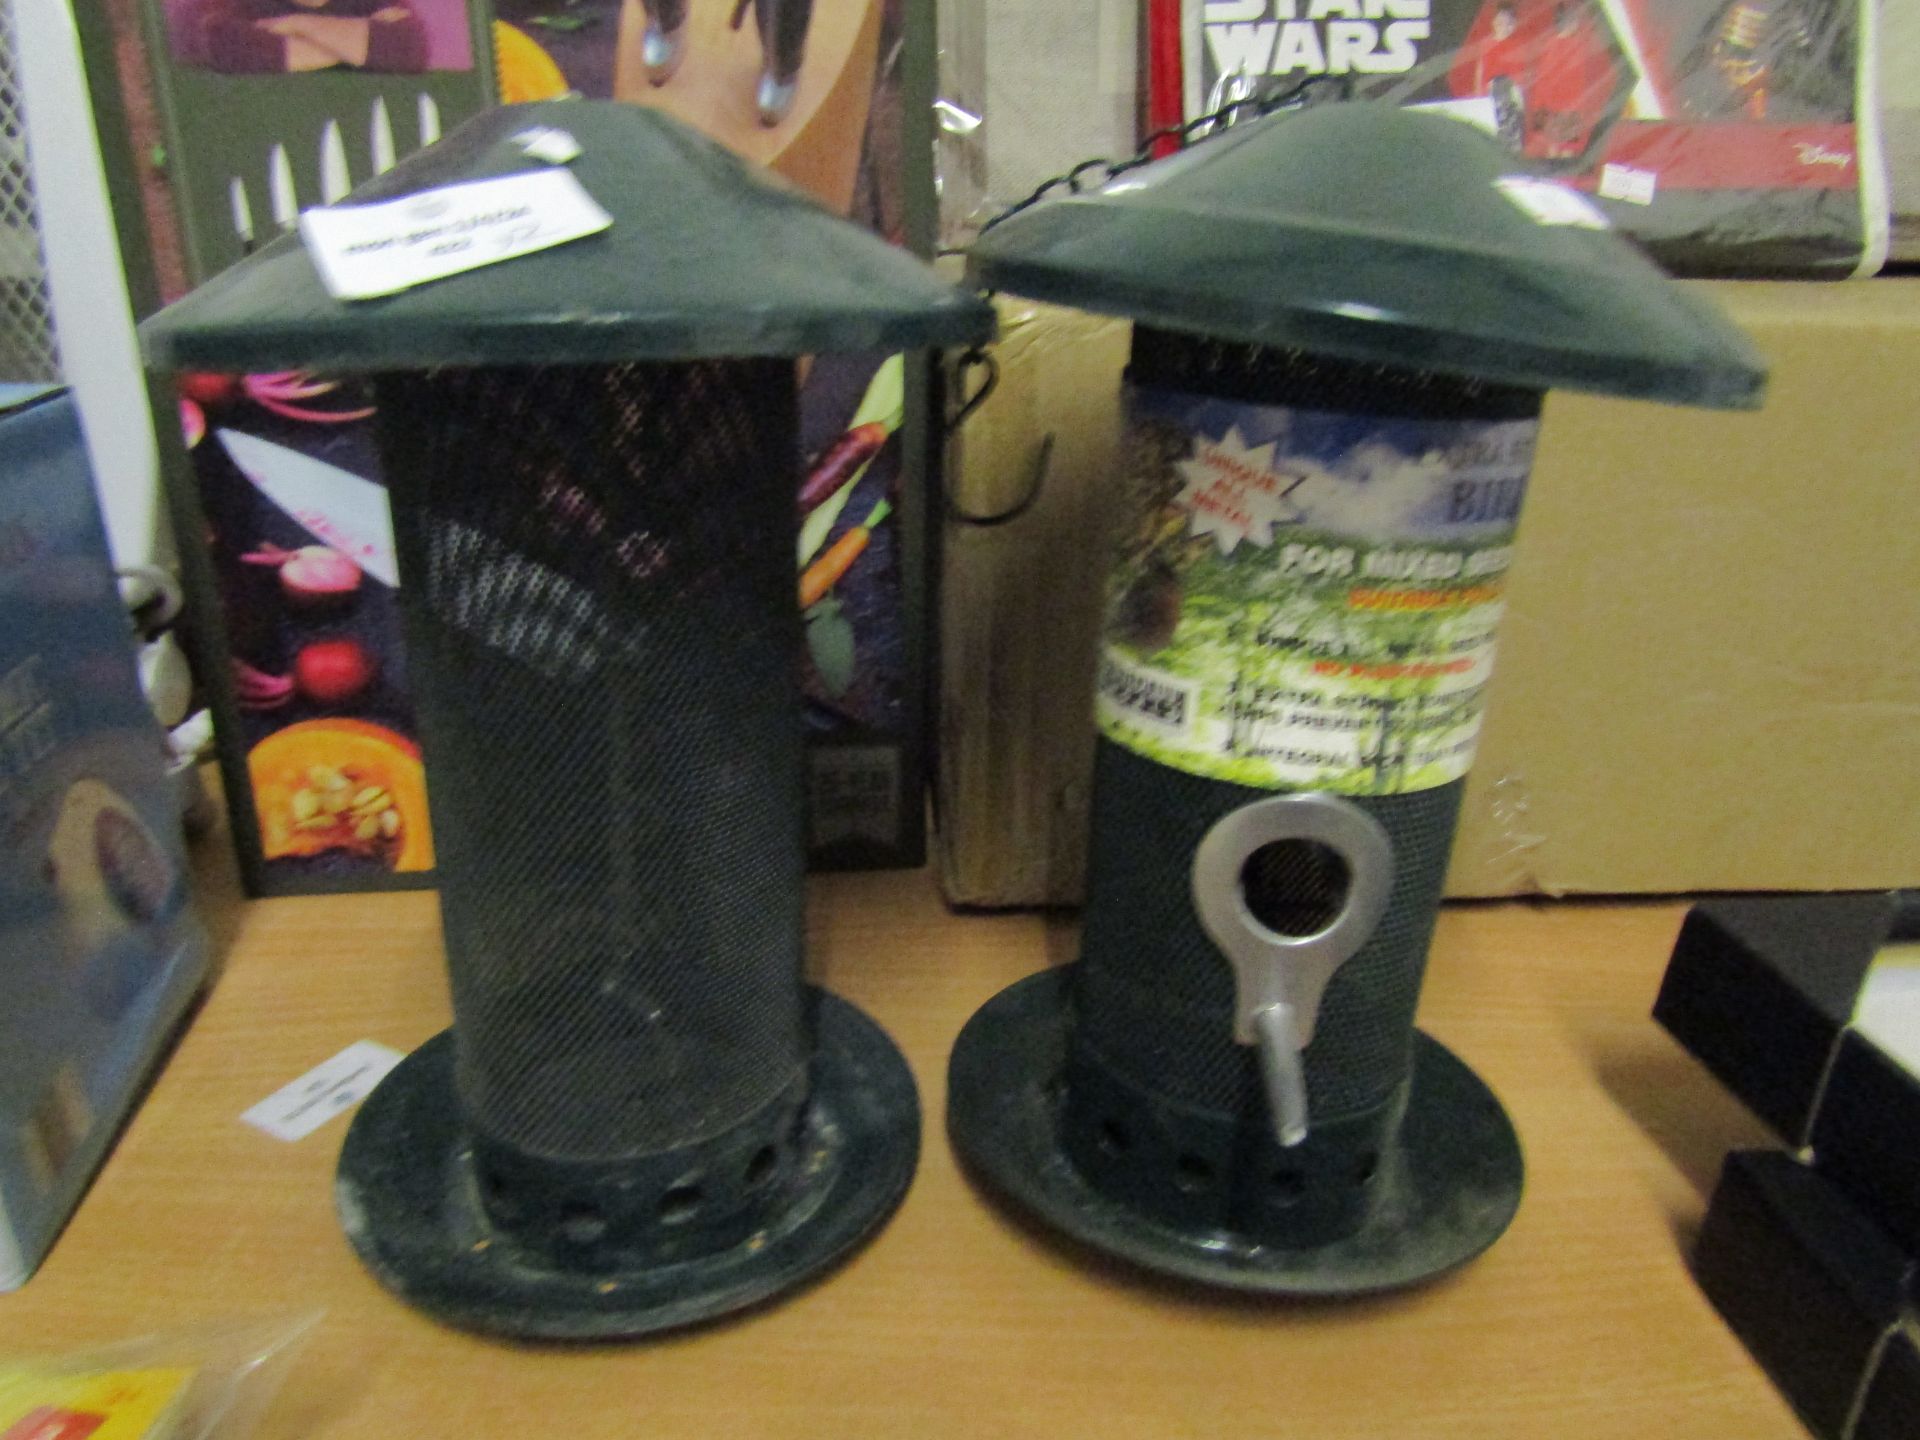 2x Extra Strong All Meal Bird Feeder - Both Appear To Be In Good Condition.